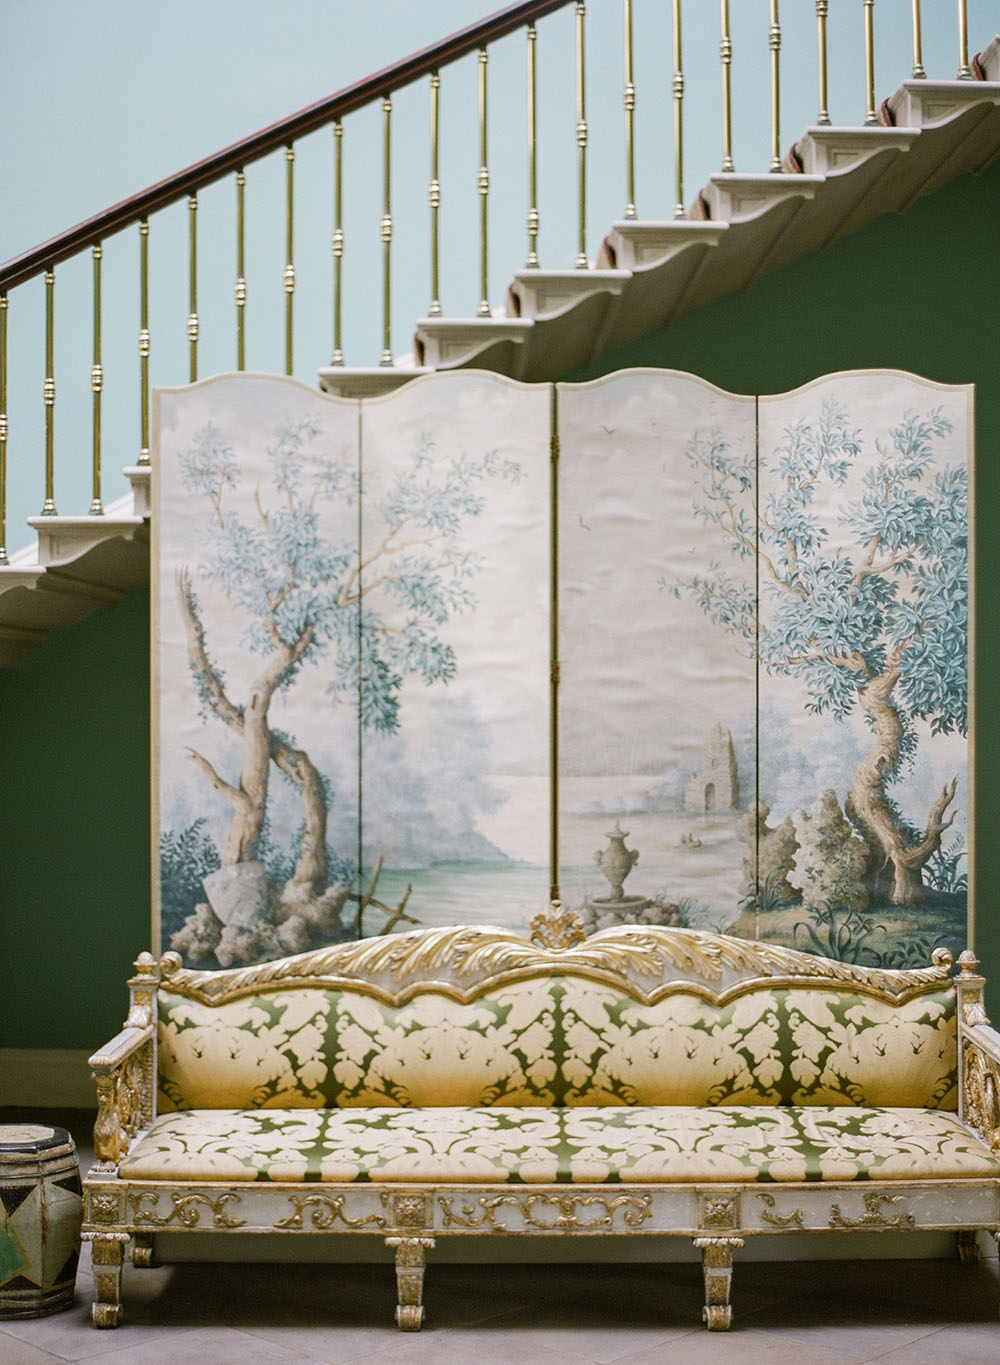 Antique patterned sofa with a handpainted mural room divider backdrop in the stairwell of Ballyfin in Ireland